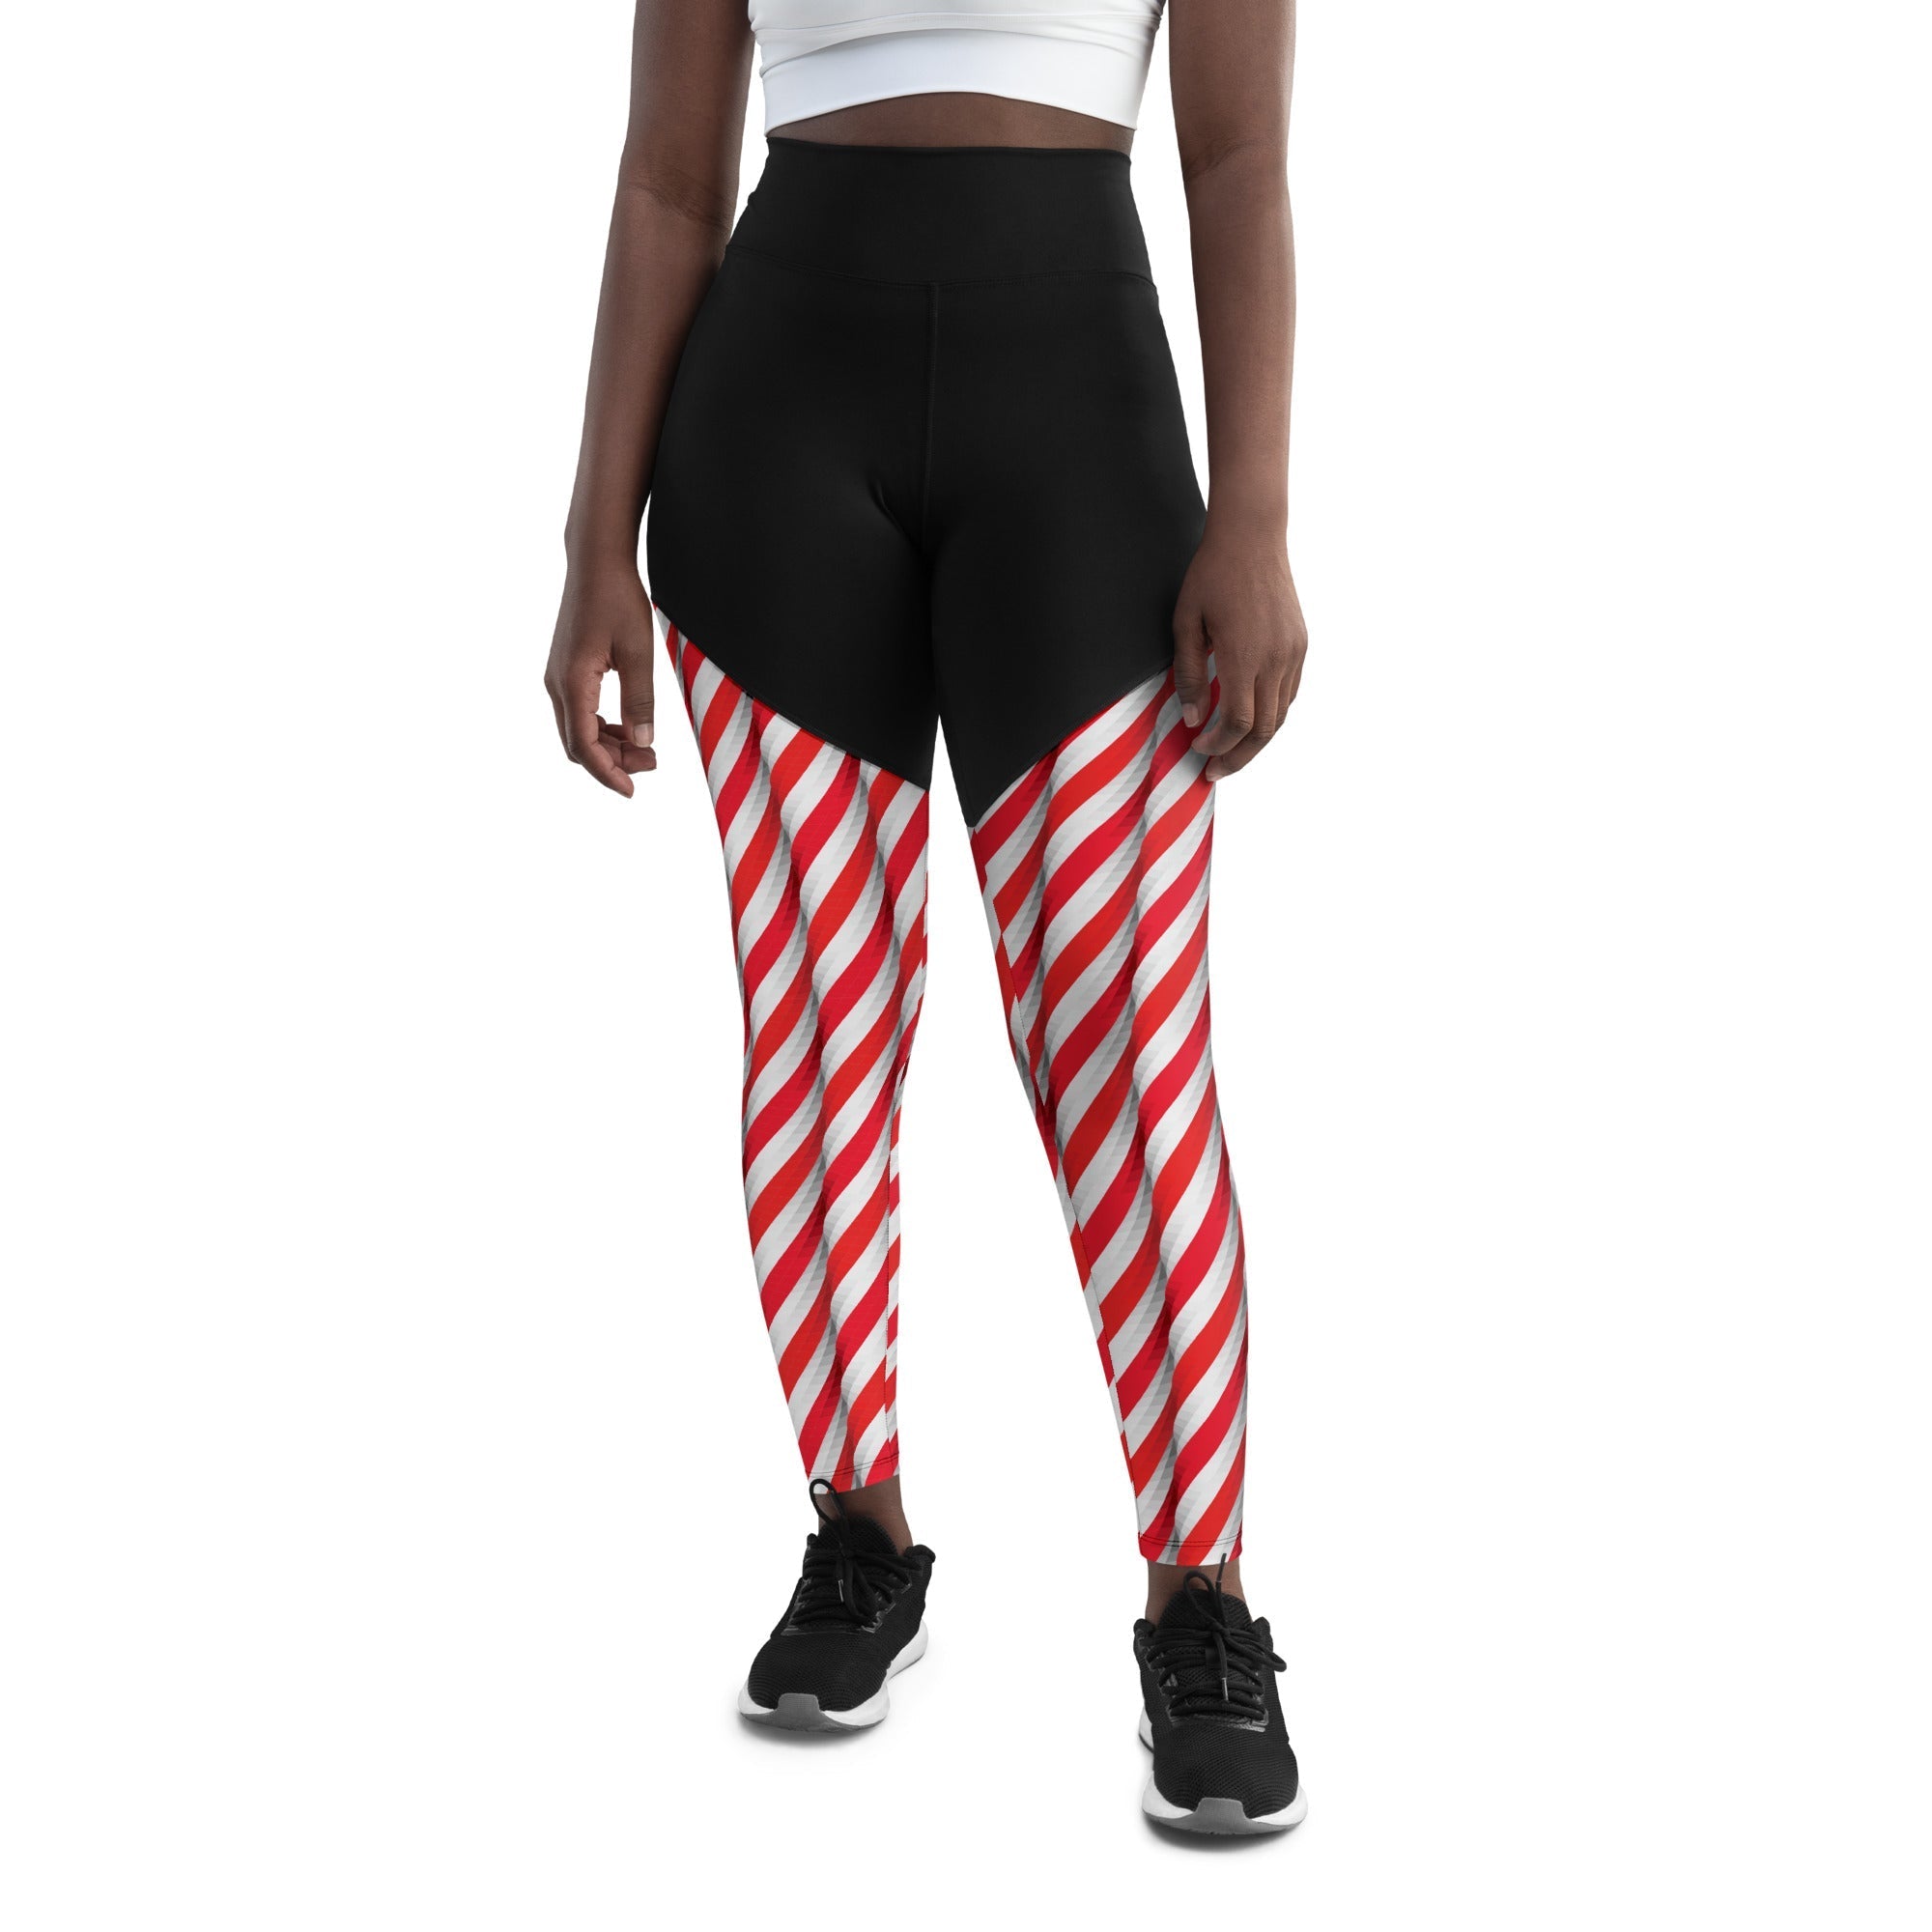 Real Candy Cane Compression Leggings